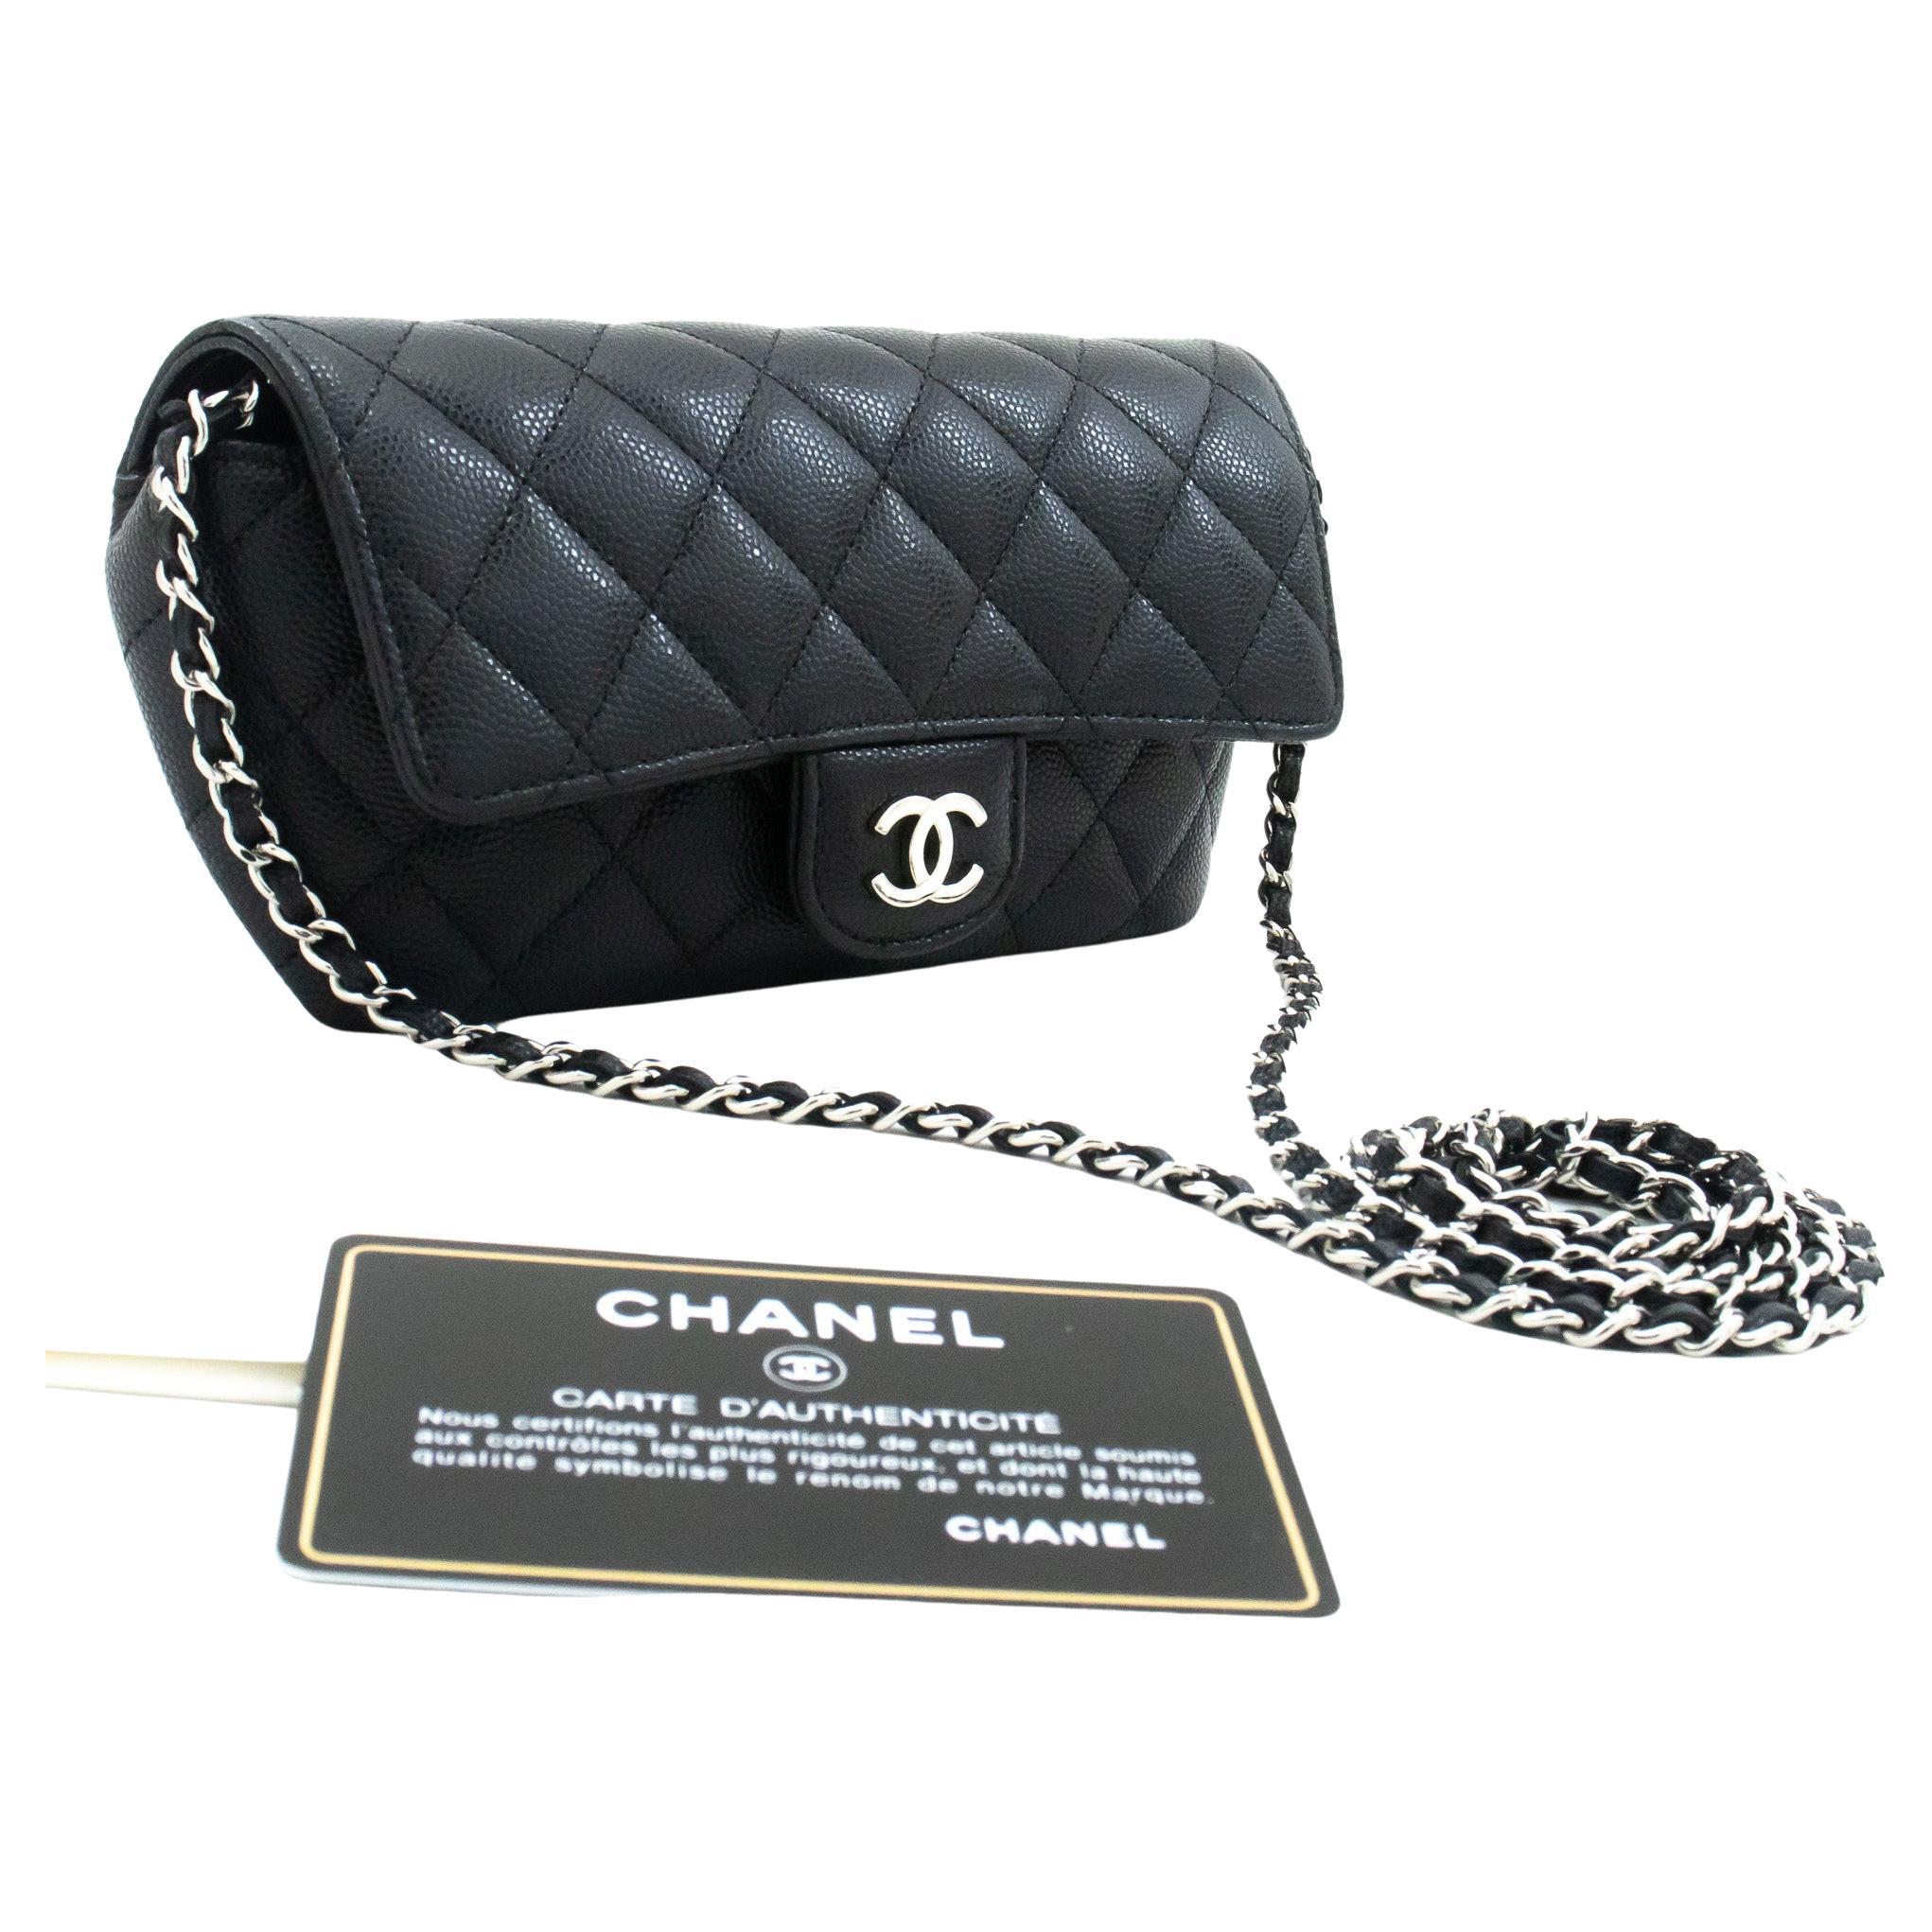 CHANEL Flap Phone Holder With Chain Bag Black Crossbody Clutch For Sale